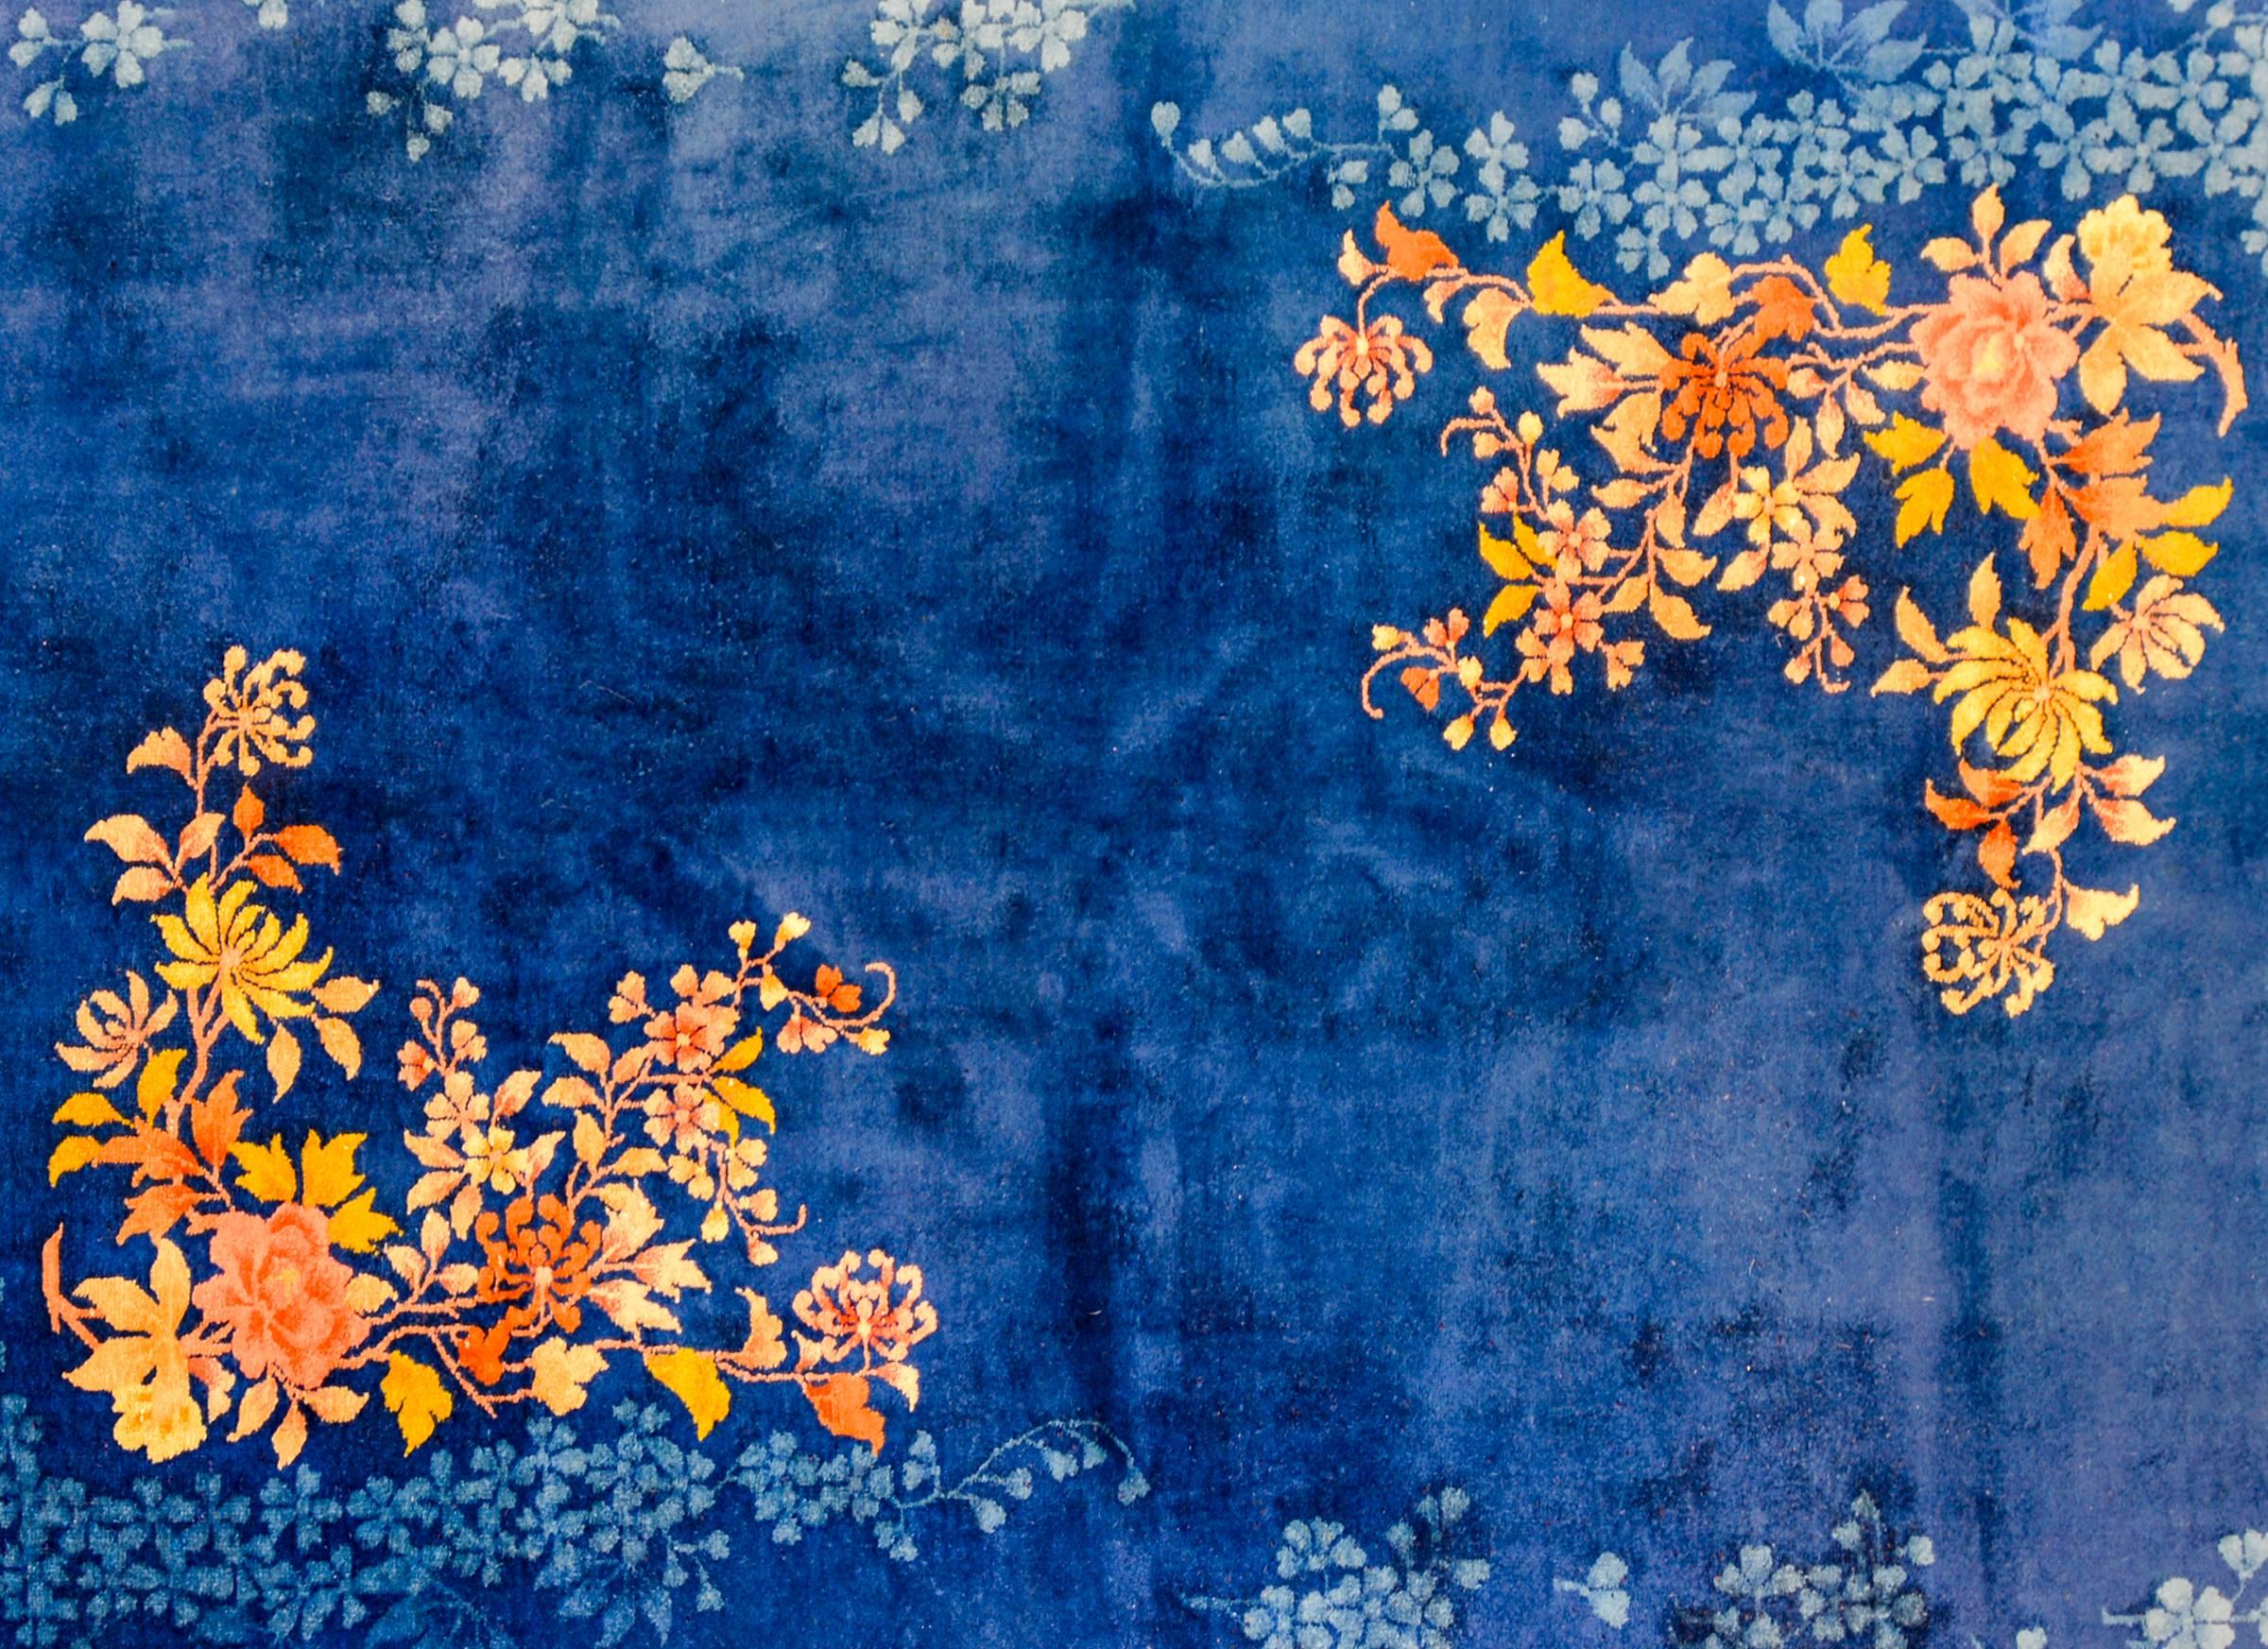 An unusual early 20th century Chinese Art Deco rug with an asymmetrical all-over multicolored flowering peony, chrysanthemum, and cherry blossom pattern woven in orange, gold, and brown vegetable dyed wool with a matching pale indigo 